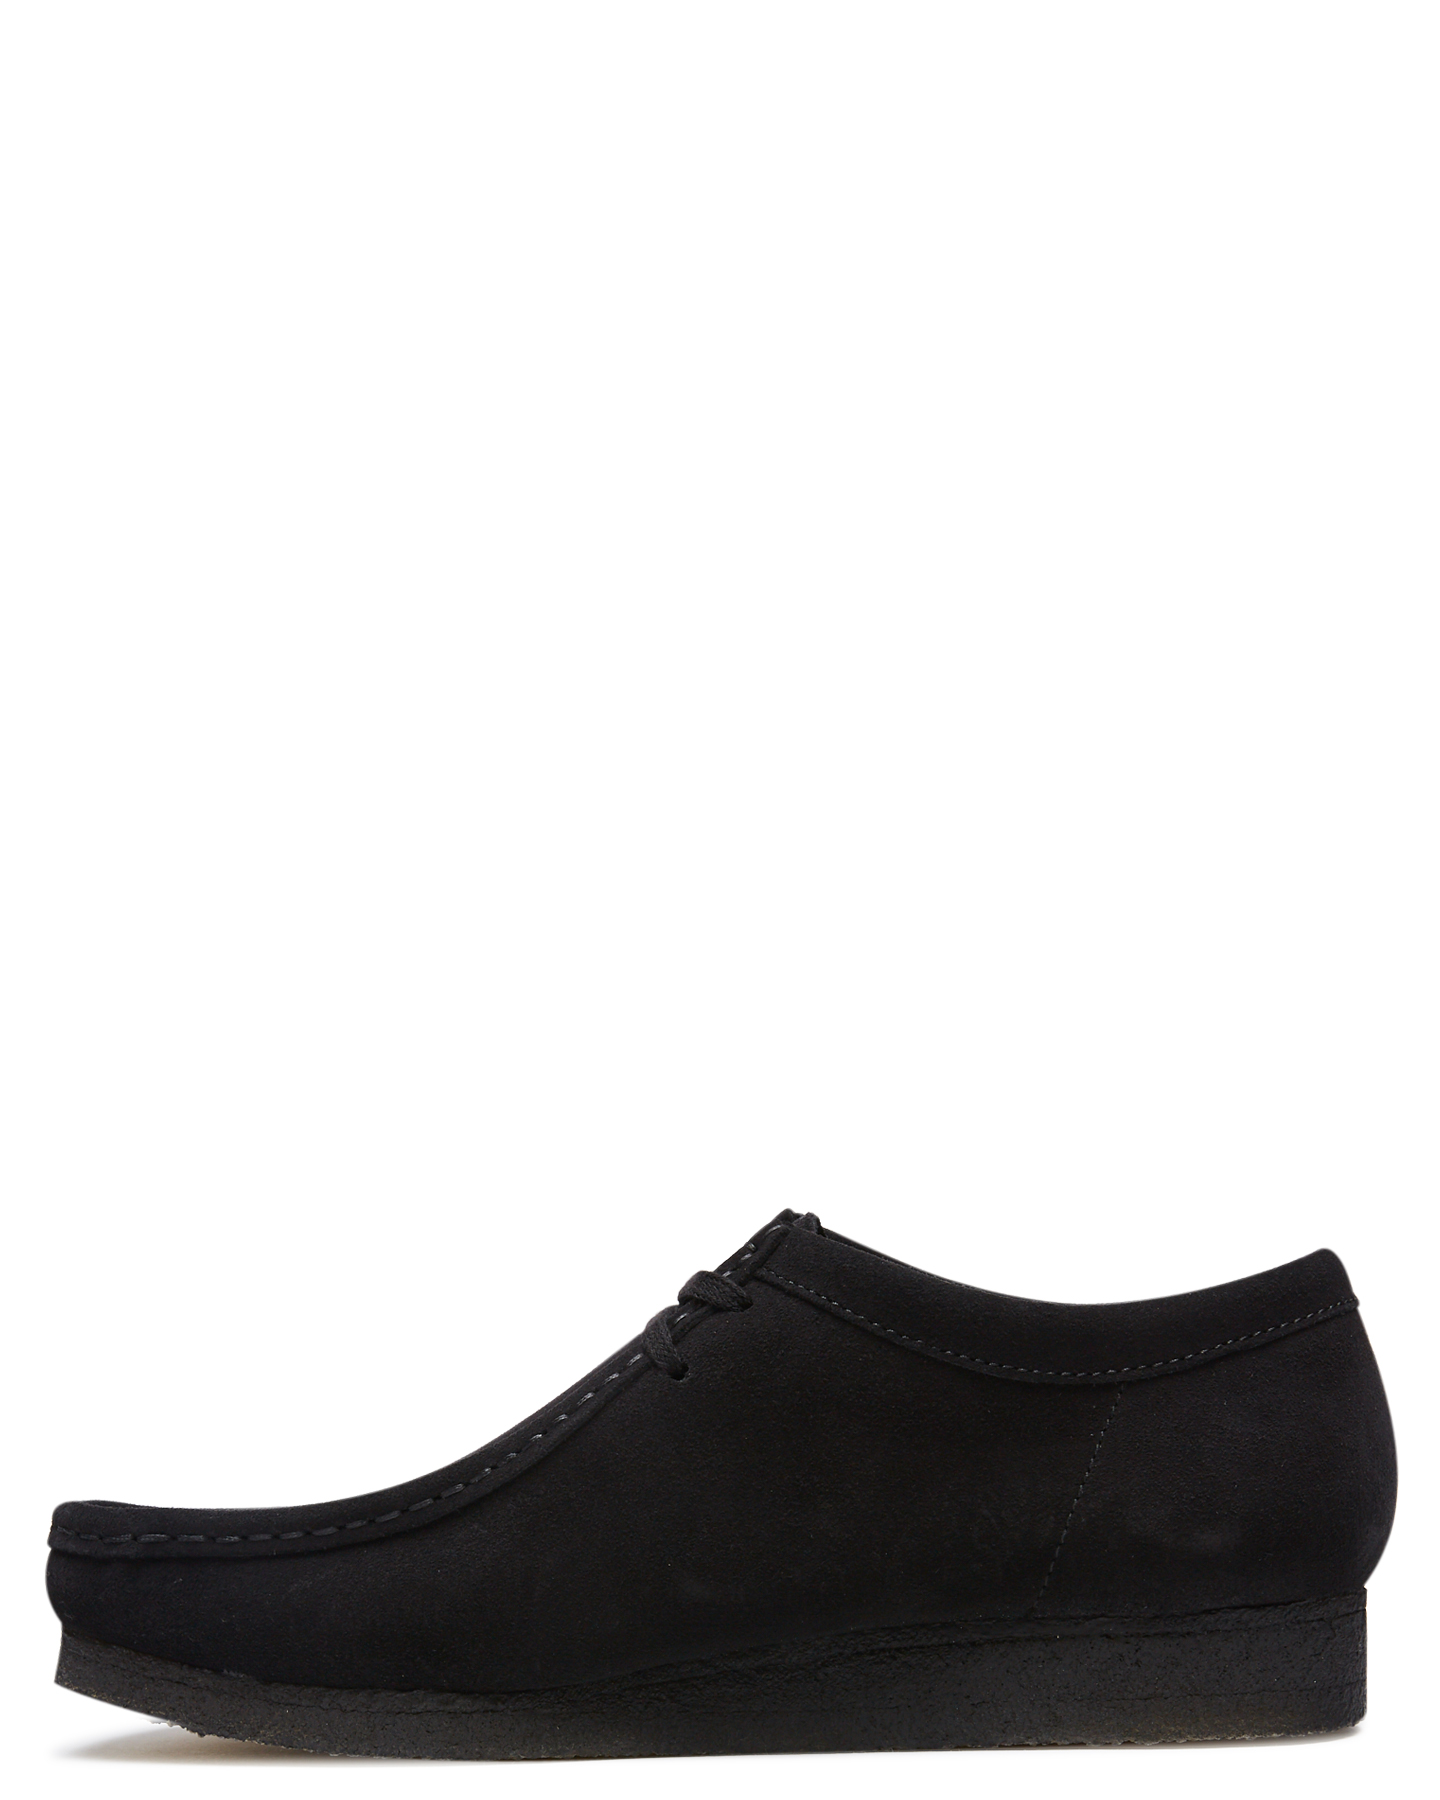 clarks black mens trainers